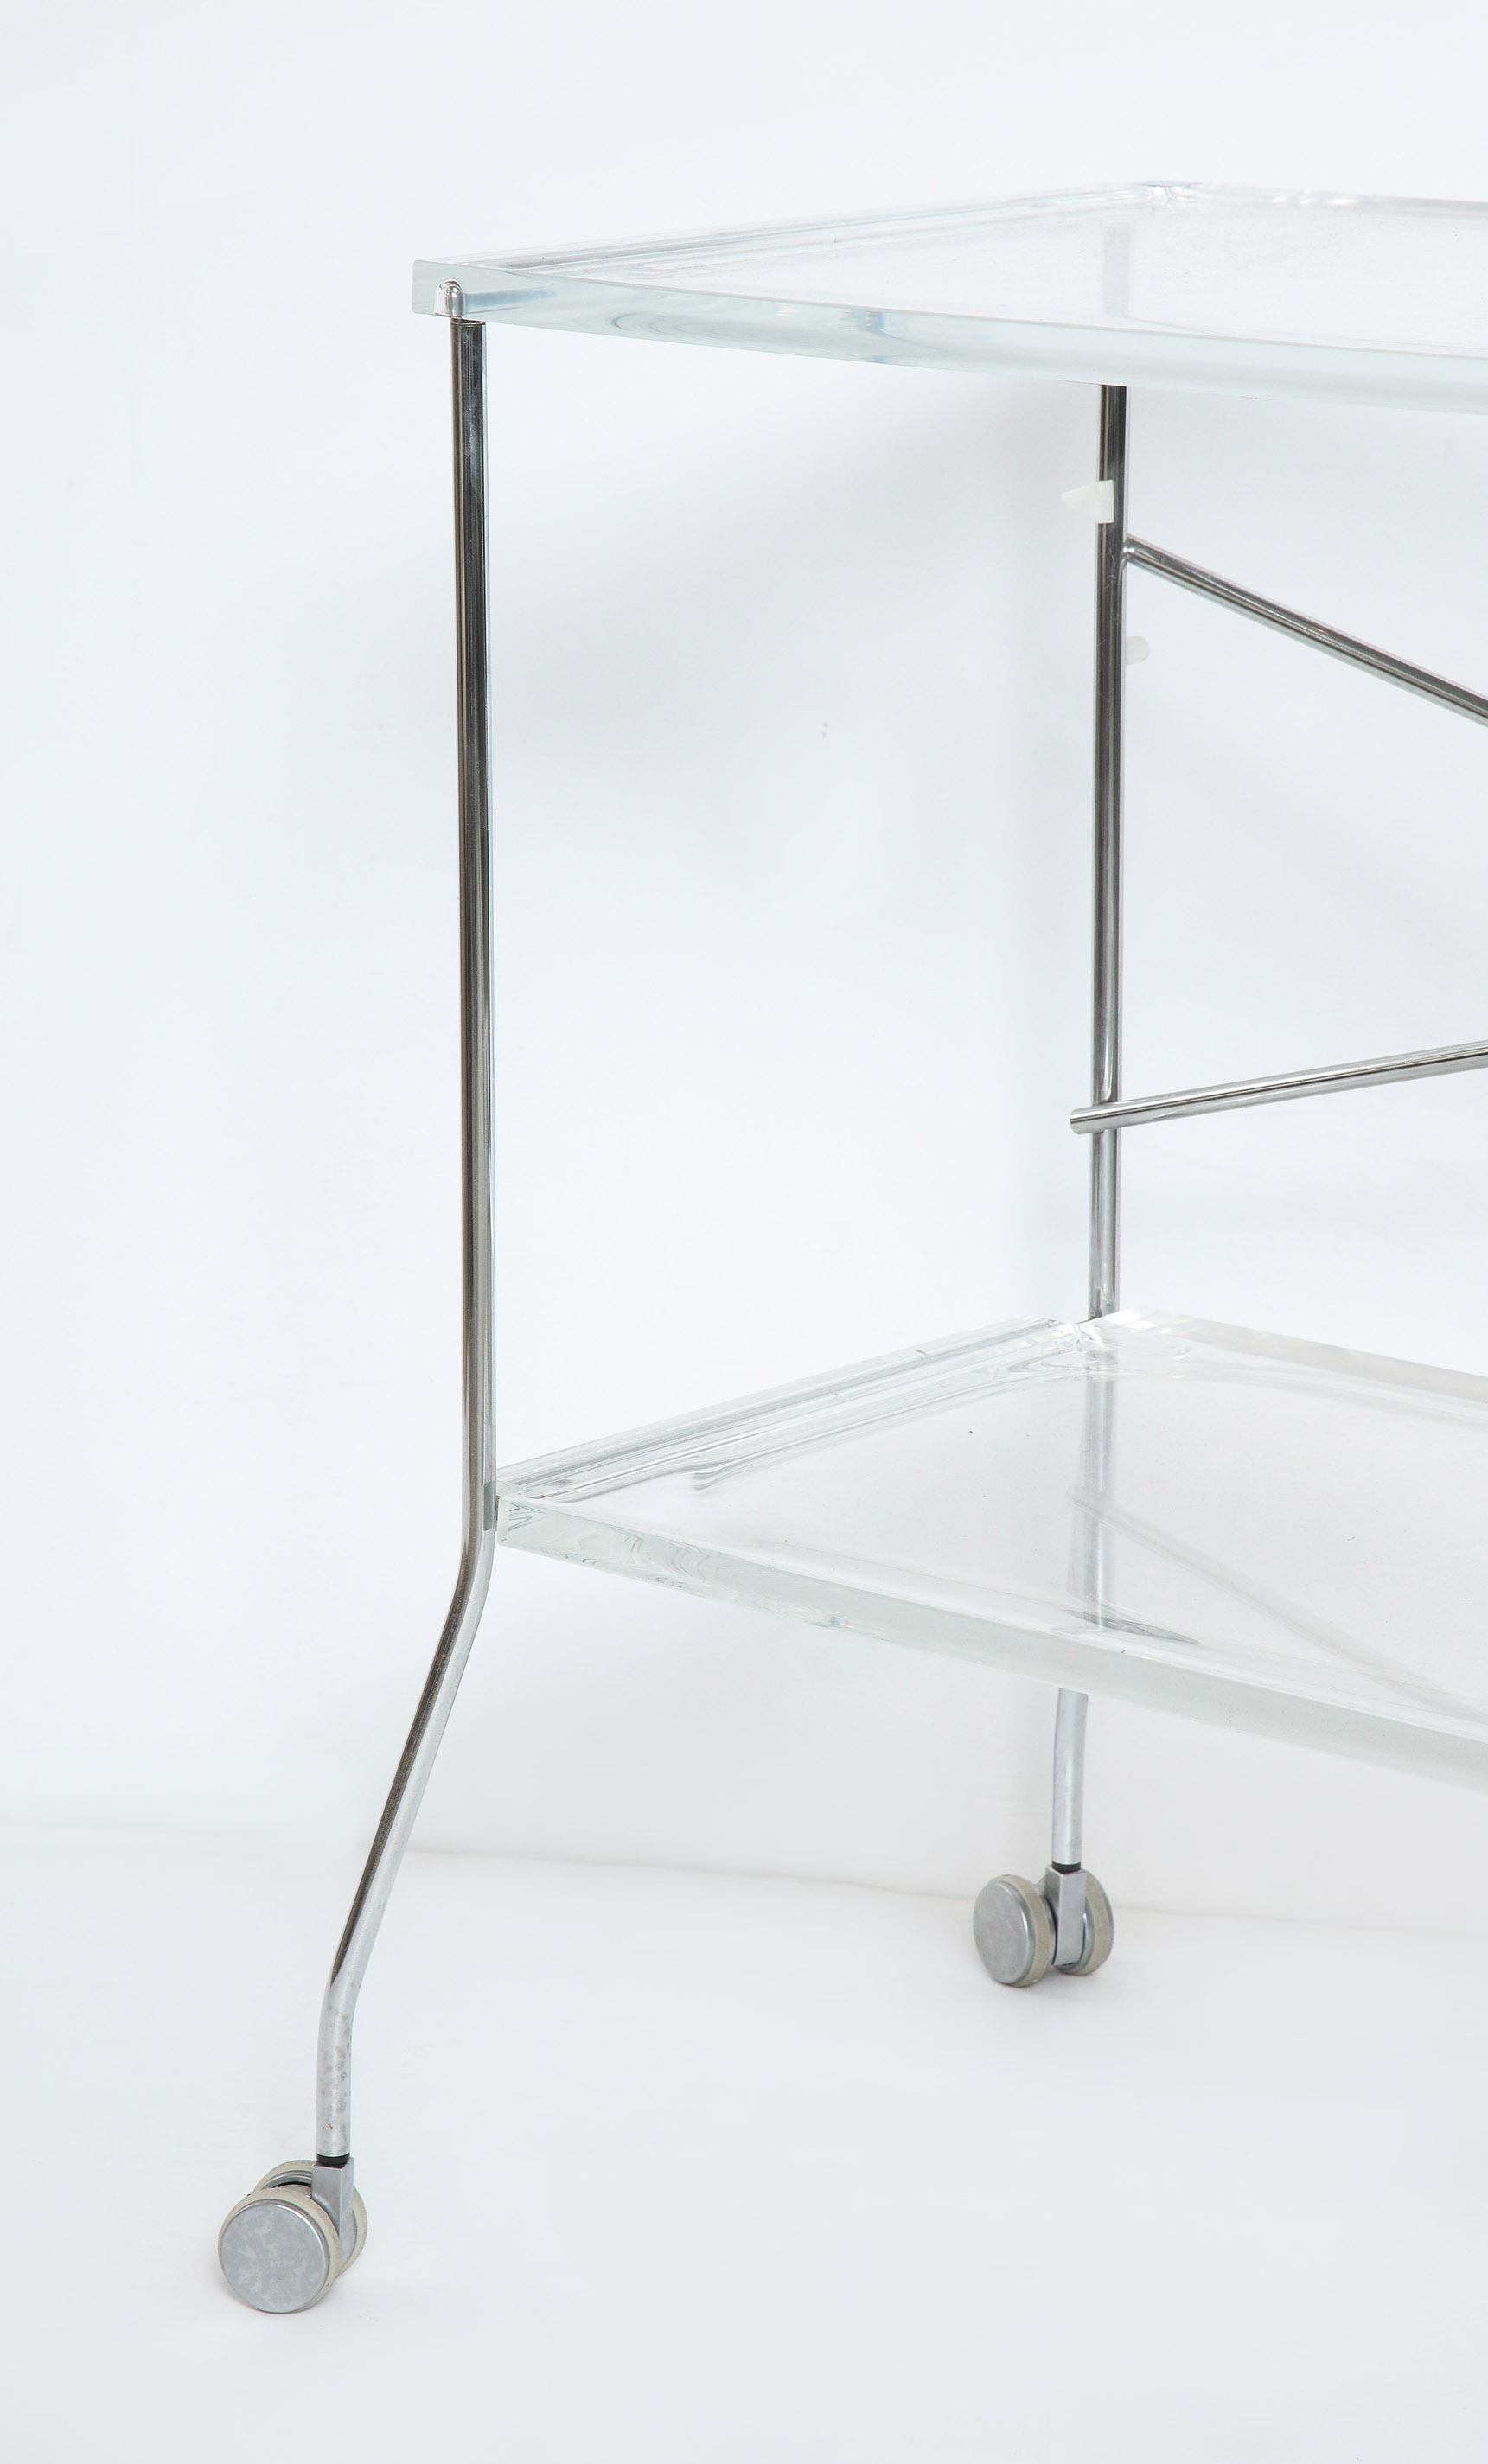 20th Century Flip Folding Trolley Table by A. Citterio with Toan Nguyen for Kartell For Sale